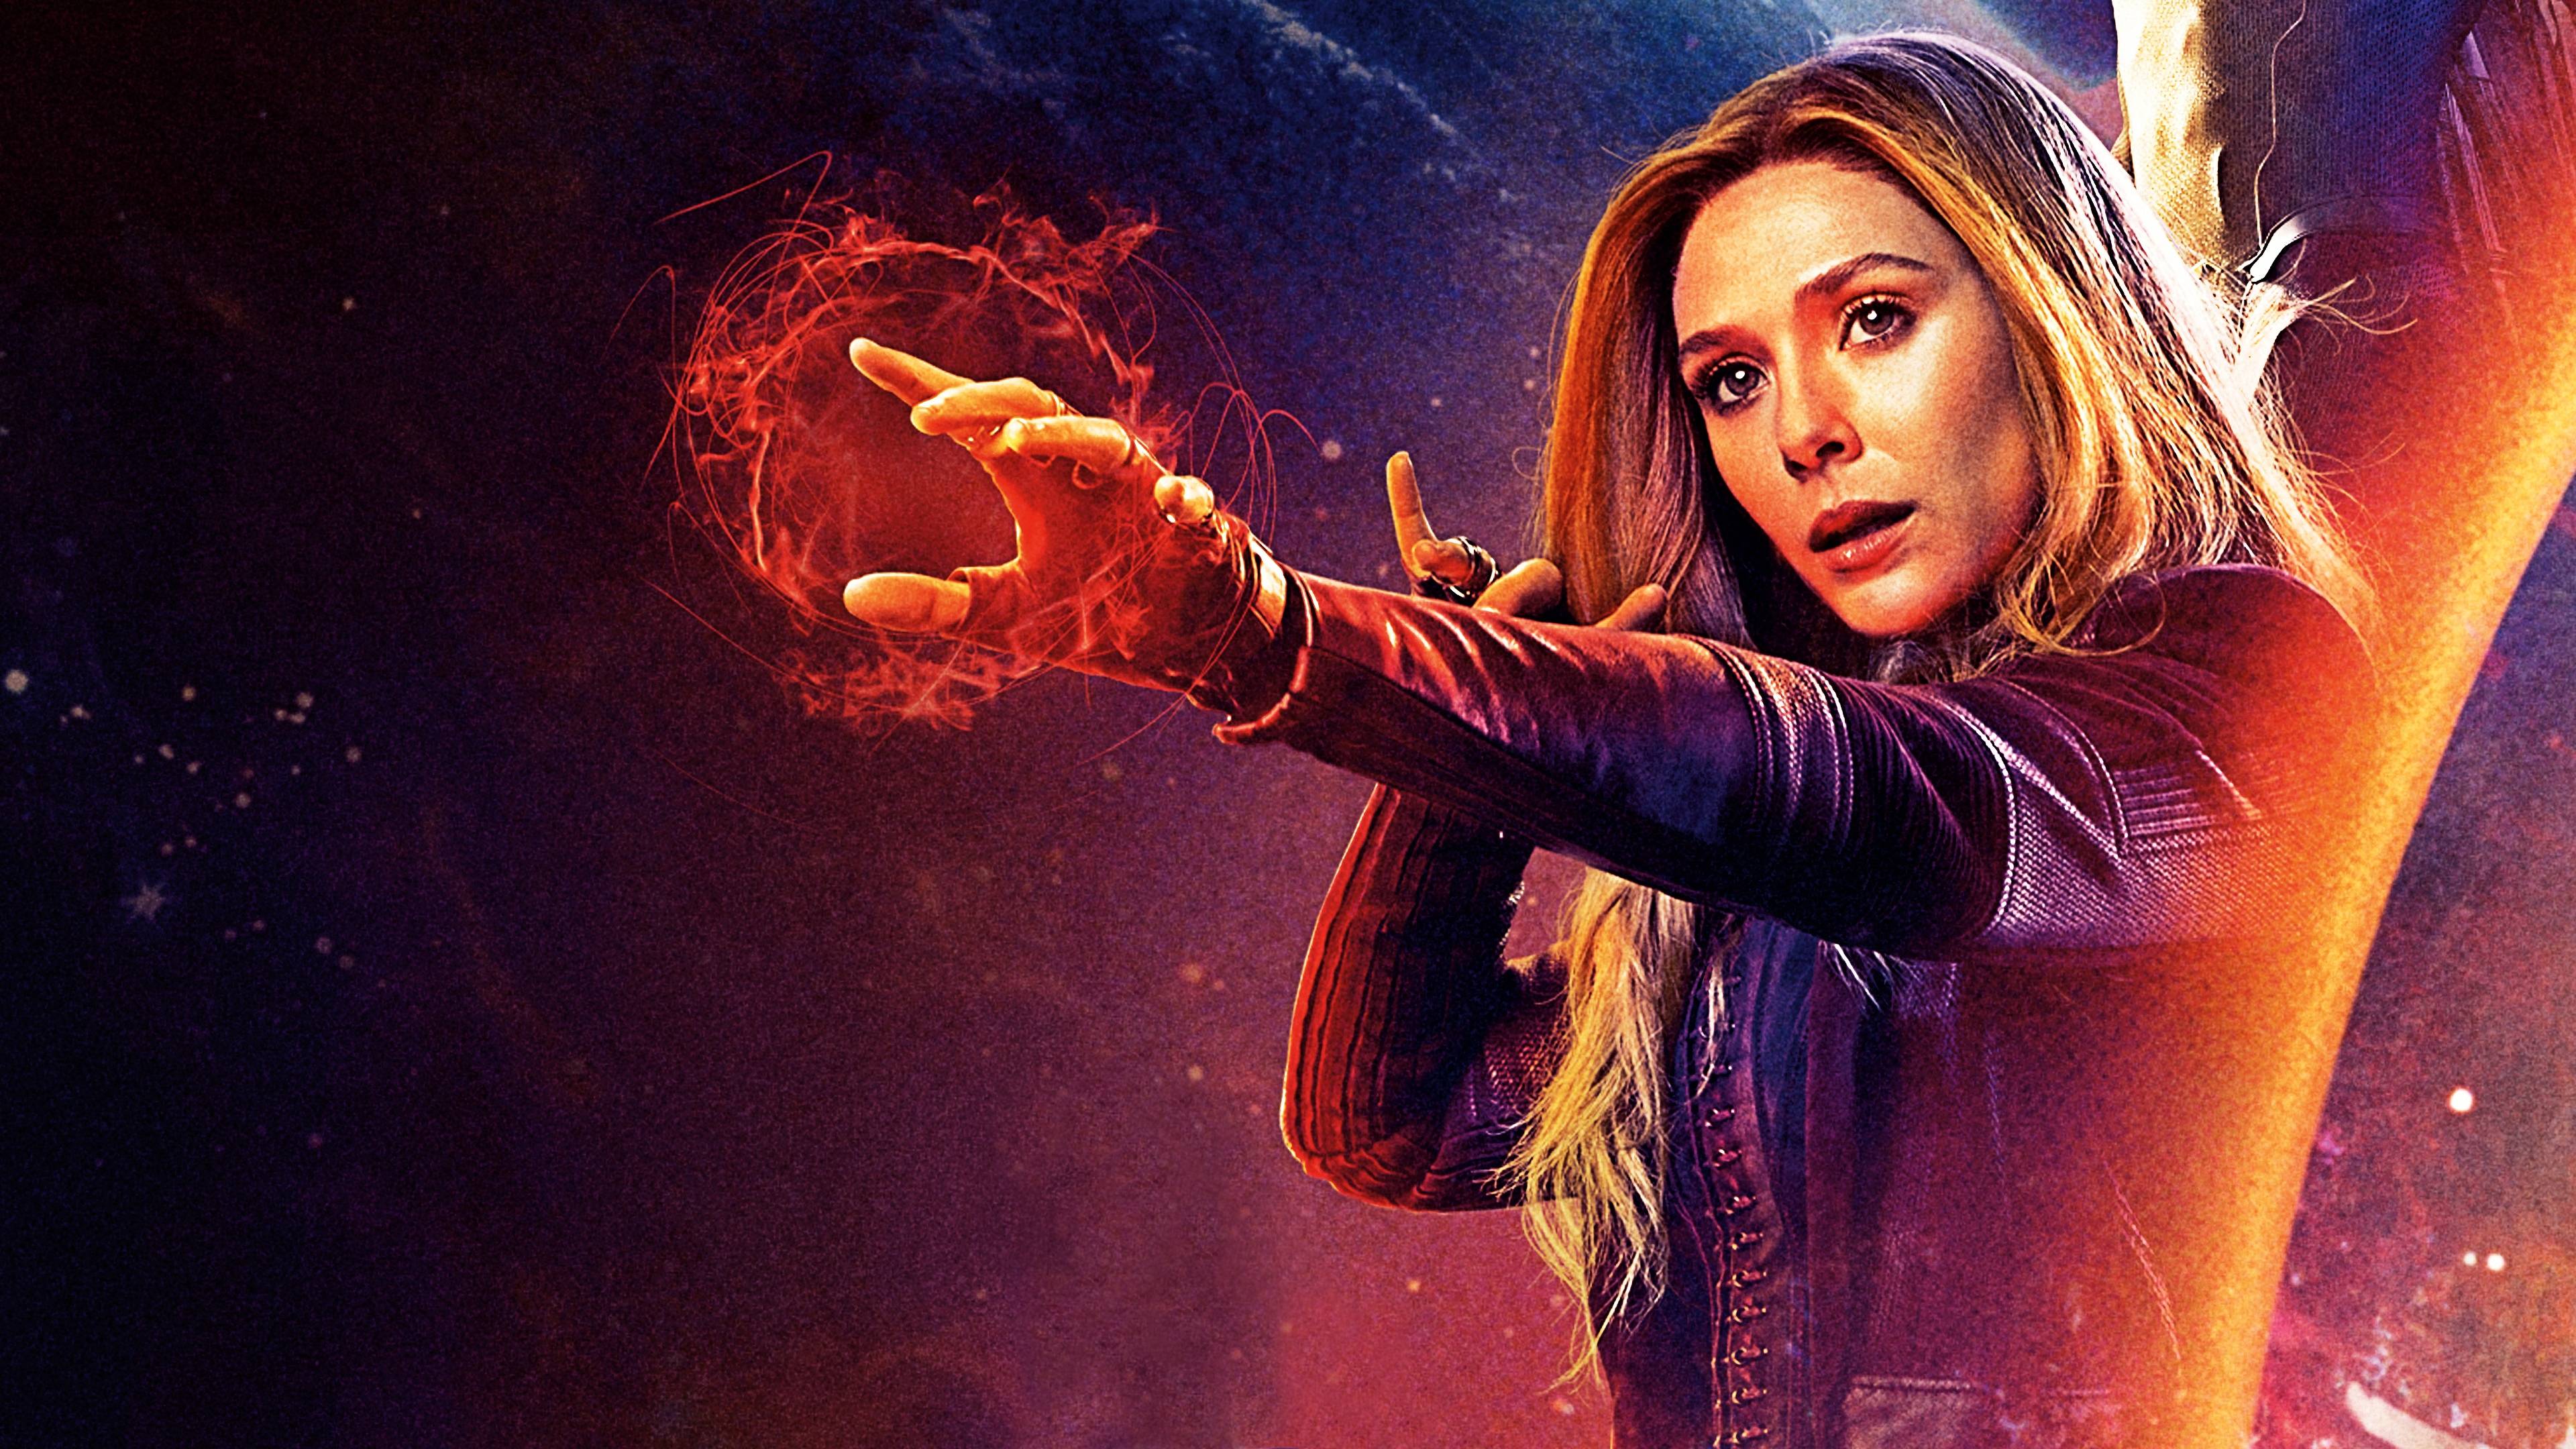 Free download Scarlet Witch Wallpapers Top 35 Best Scarlet Witch  Backgrounds 1920x1080 for your Desktop Mobile  Tablet  Explore 24 Scarlet  Witch Desktop Wallpapers  Witch Wallpaper Halloween Witch Wallpaper  Halloween Witch Wallpapers